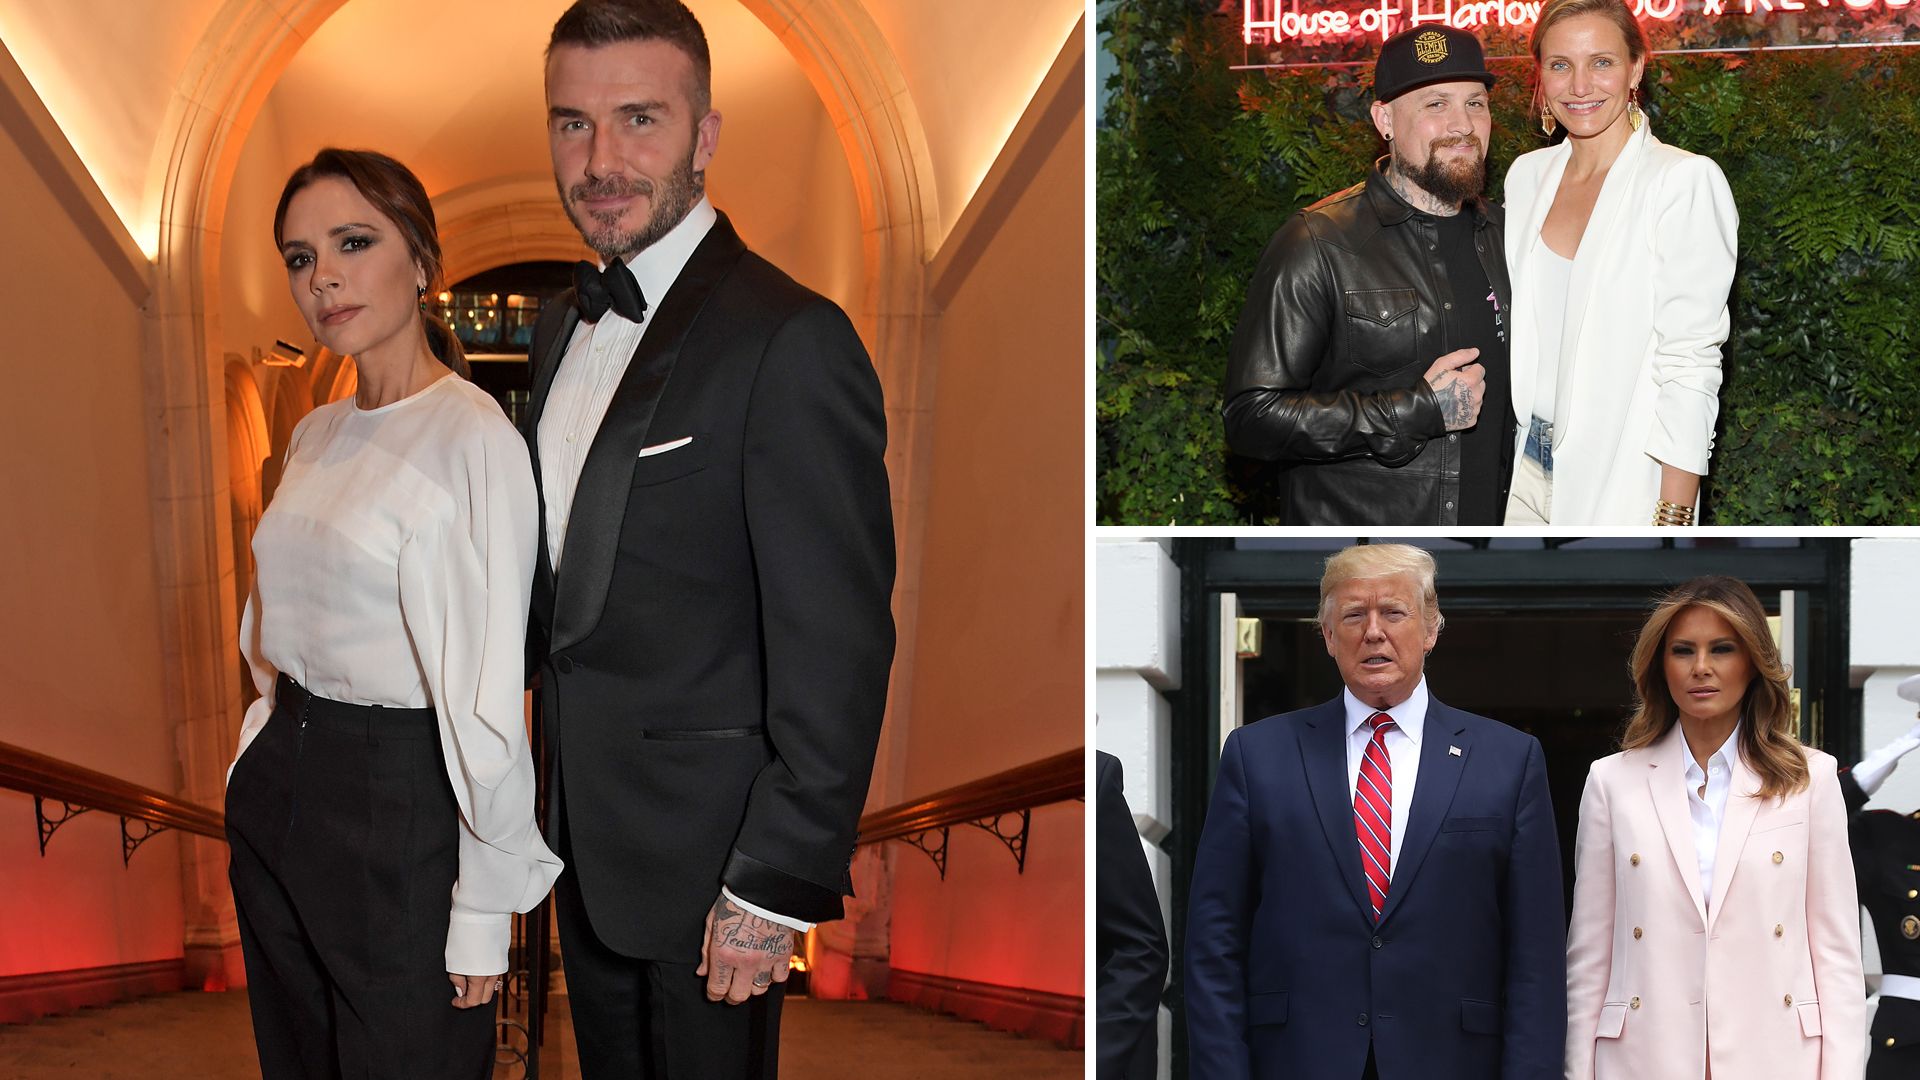 Celebrity couples with unusual sleeping arrangements: Victoria and David Beckham's private wings, Cameron Diaz and Benji Madden's intimacy room & more